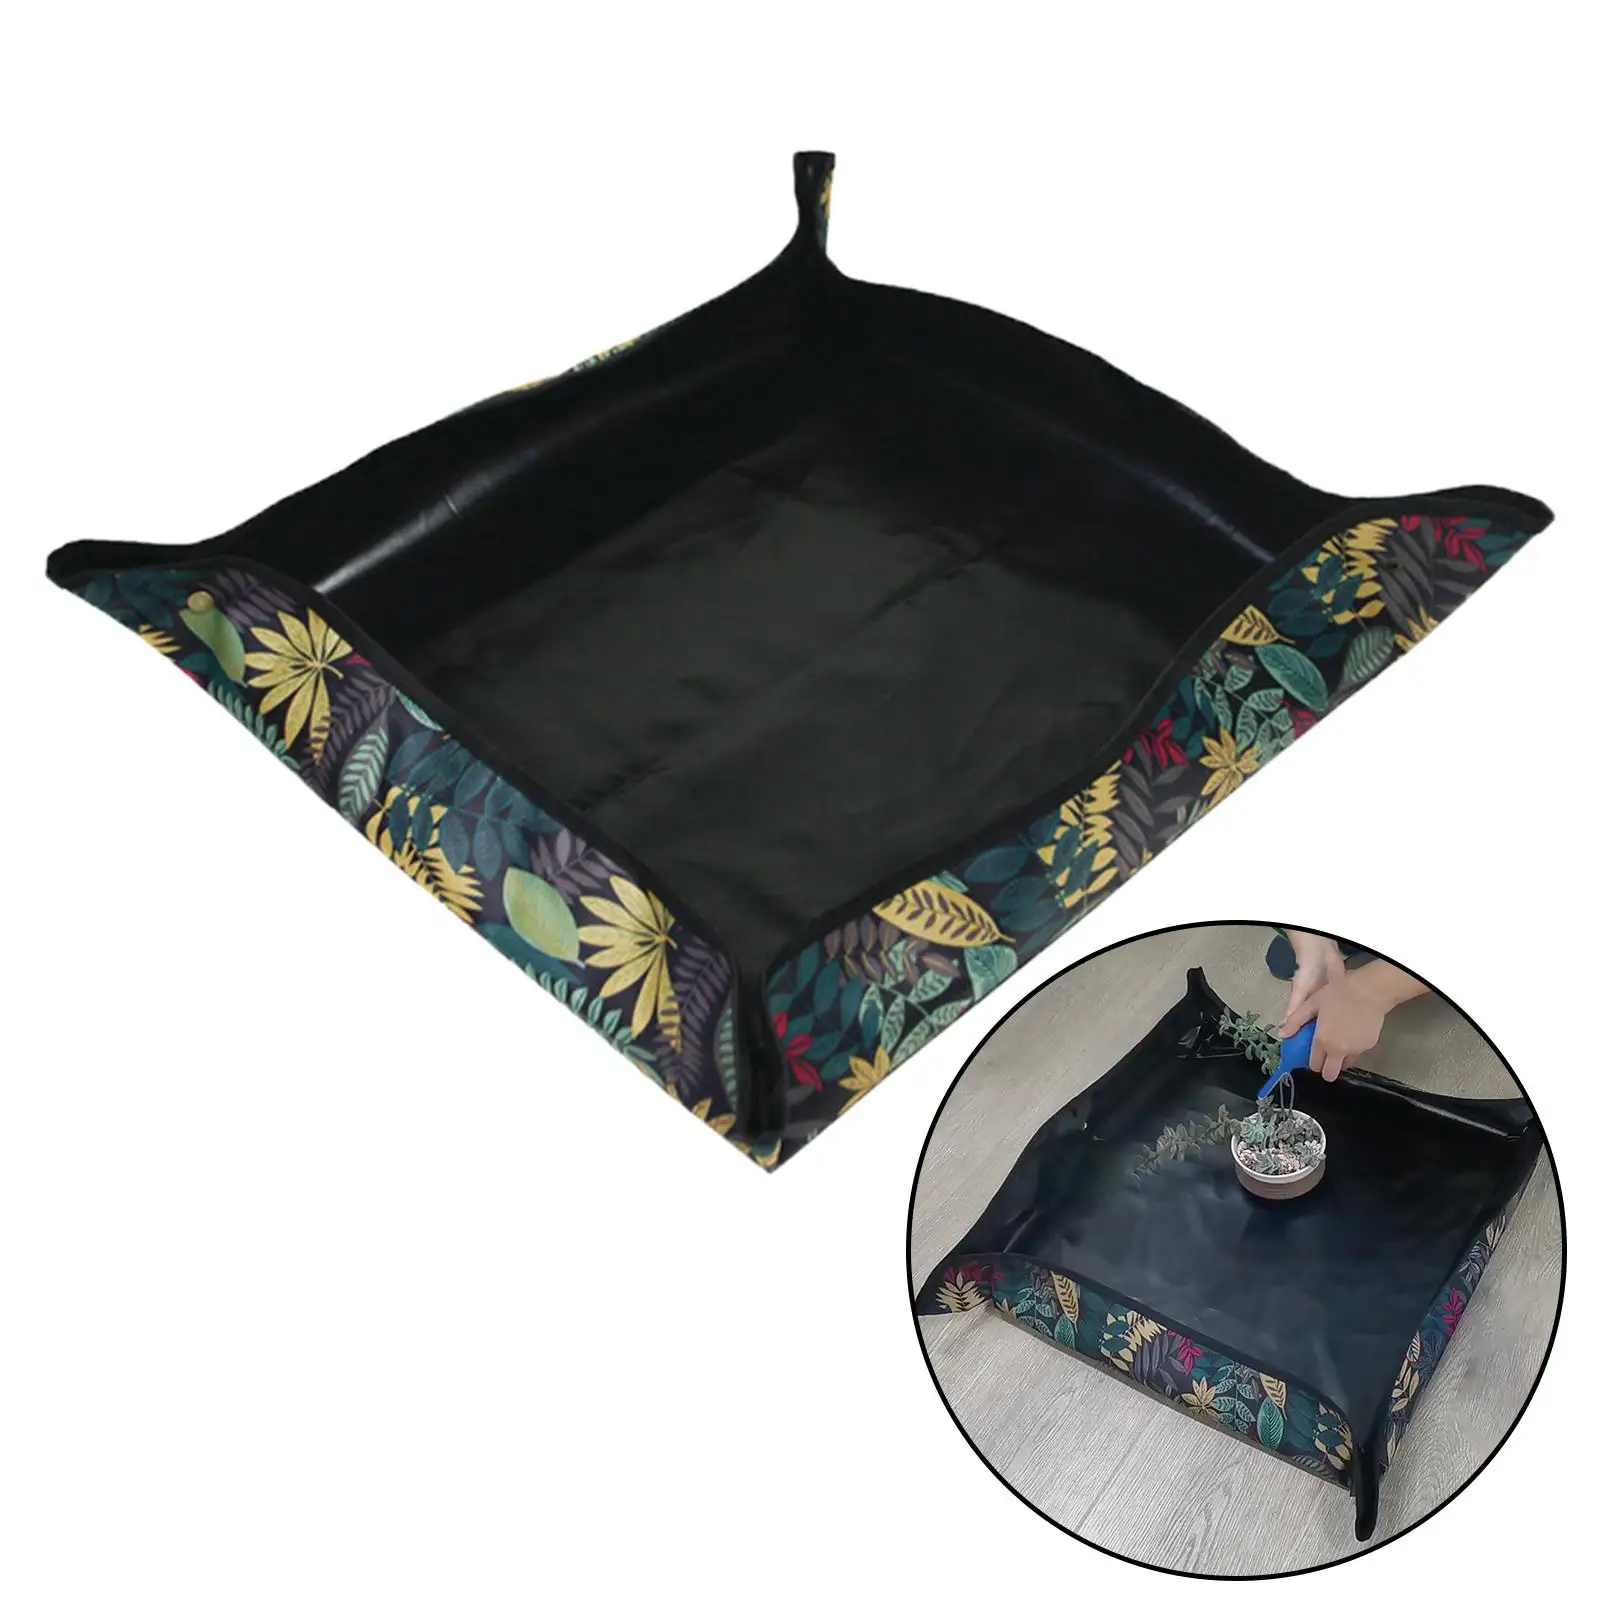  Repotting Mat Oxford Cloth Washable Foldable for Home Gardening Garden